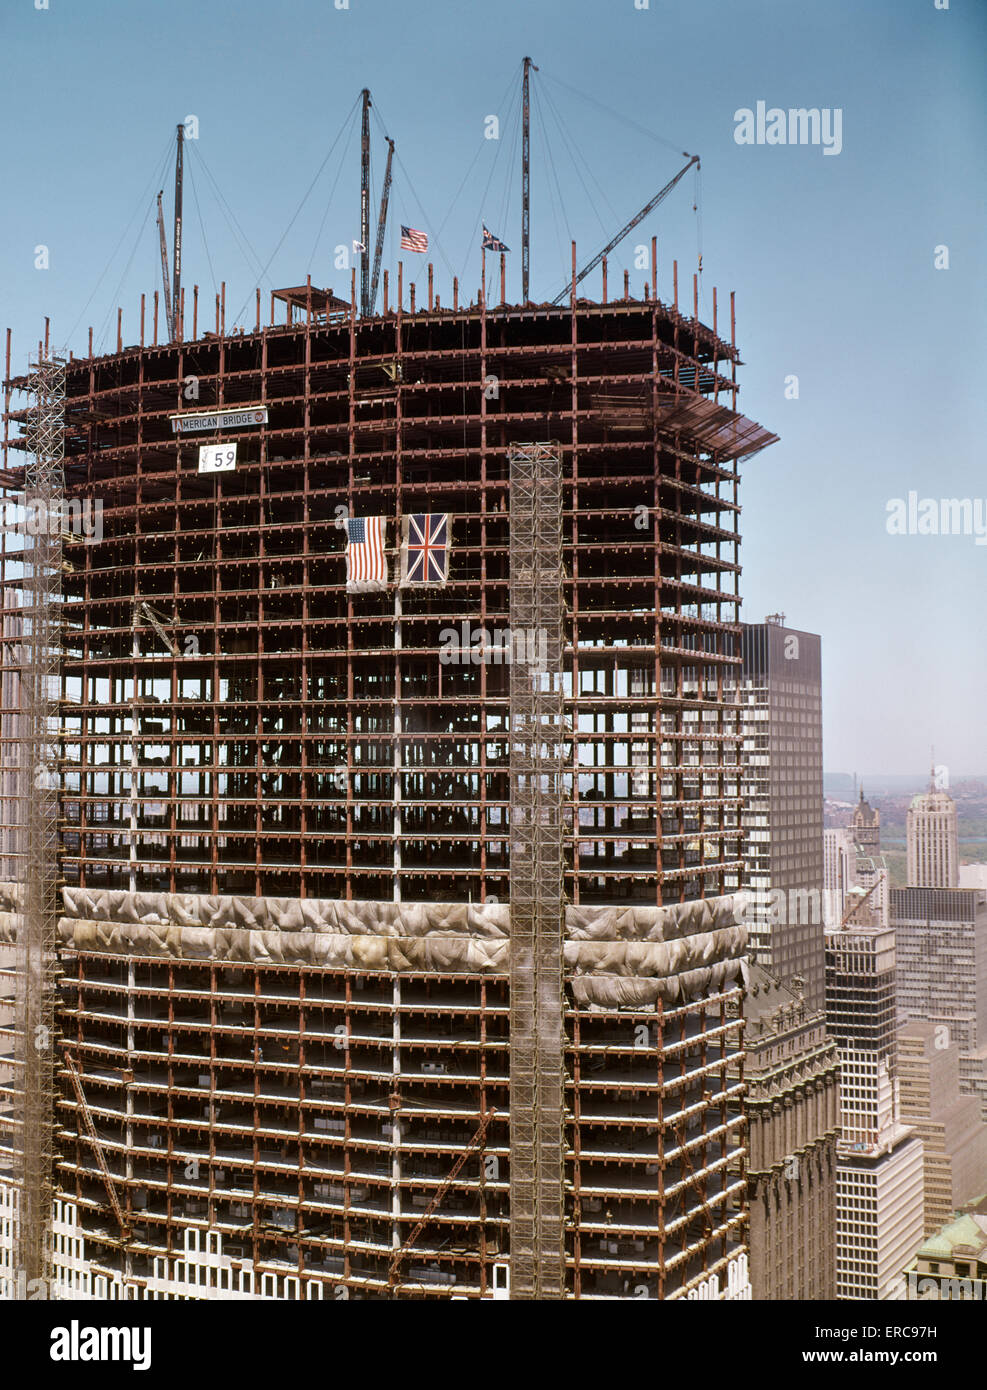 1960s AMERICAN & BRITISH FLAGS FLY ON SKELETON OF PAN AM BUILDING UNDER CONSTRUCTION MIDTOWN MANHATTAN NEW YORK CITY USA Stock Photo